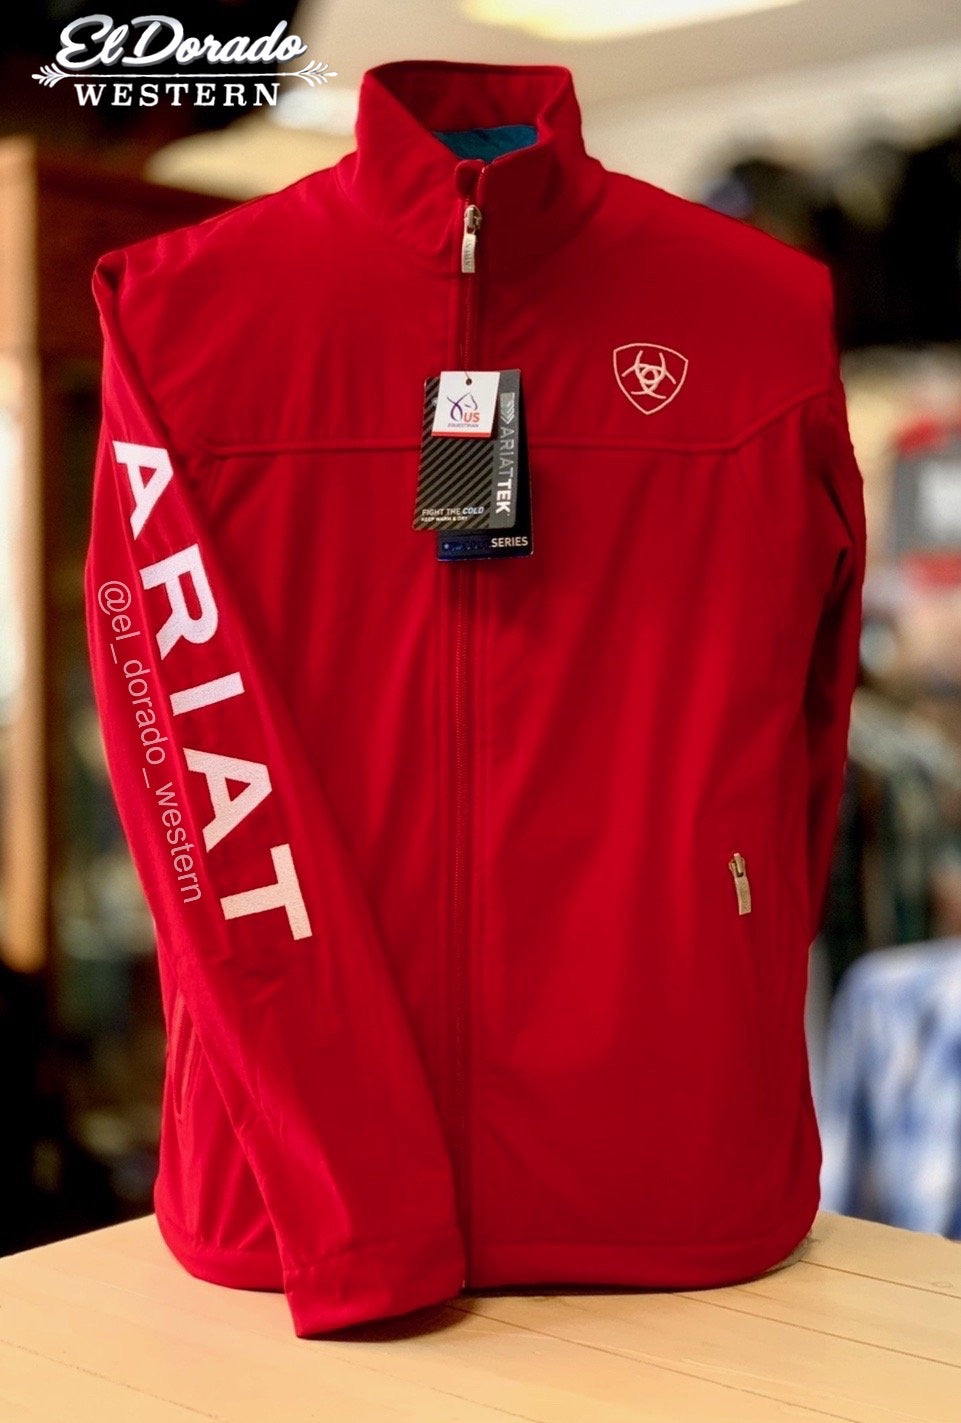 Best Price on New Ariat Team Jacket - Red, White, and Blue